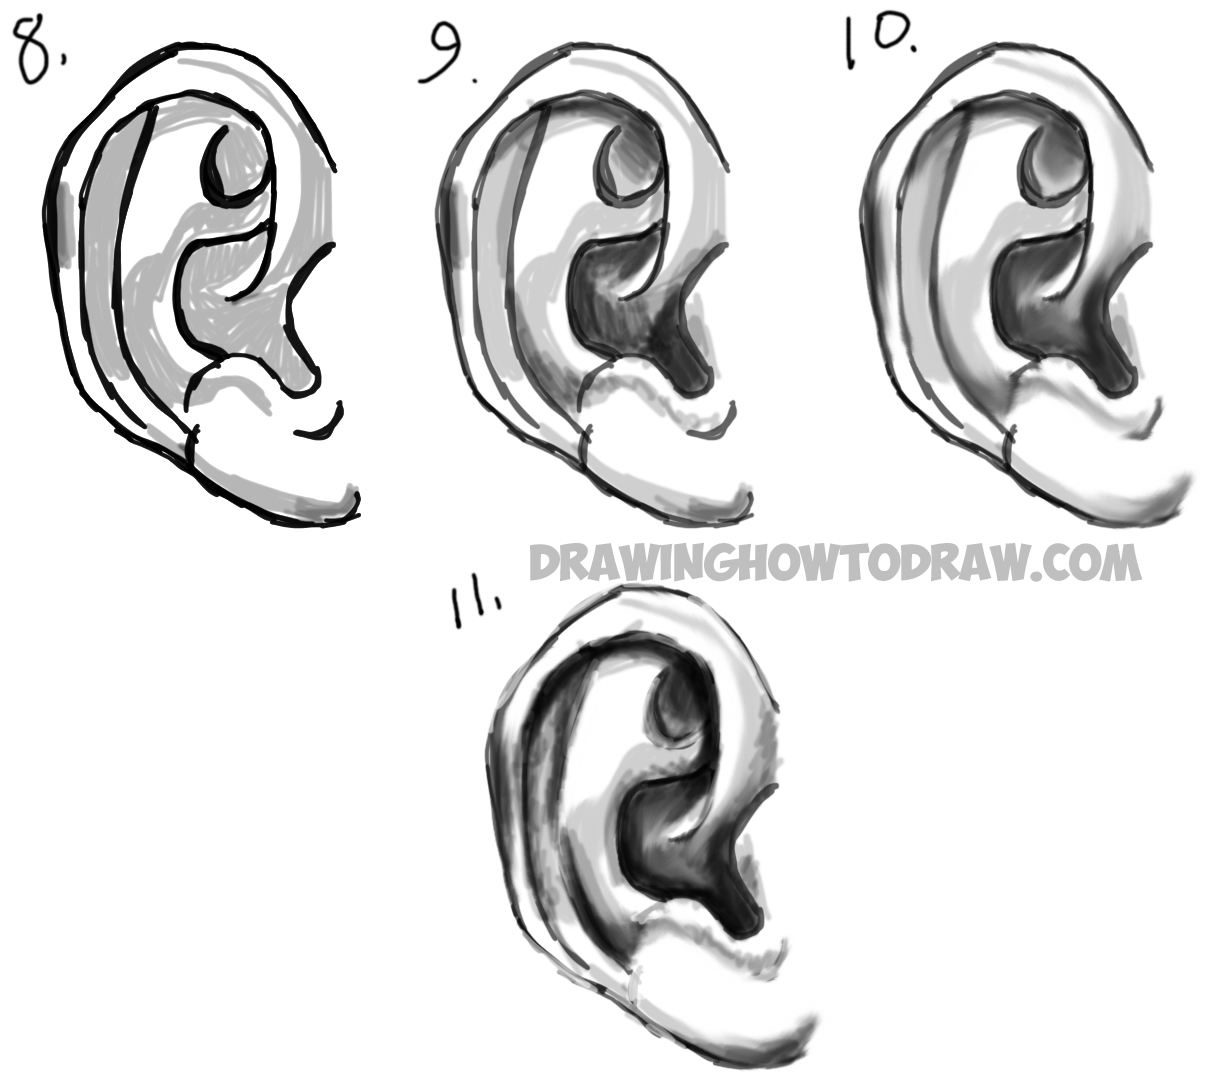 howtodraw-realistic-ears2 How to draw an ear from the front and from the side